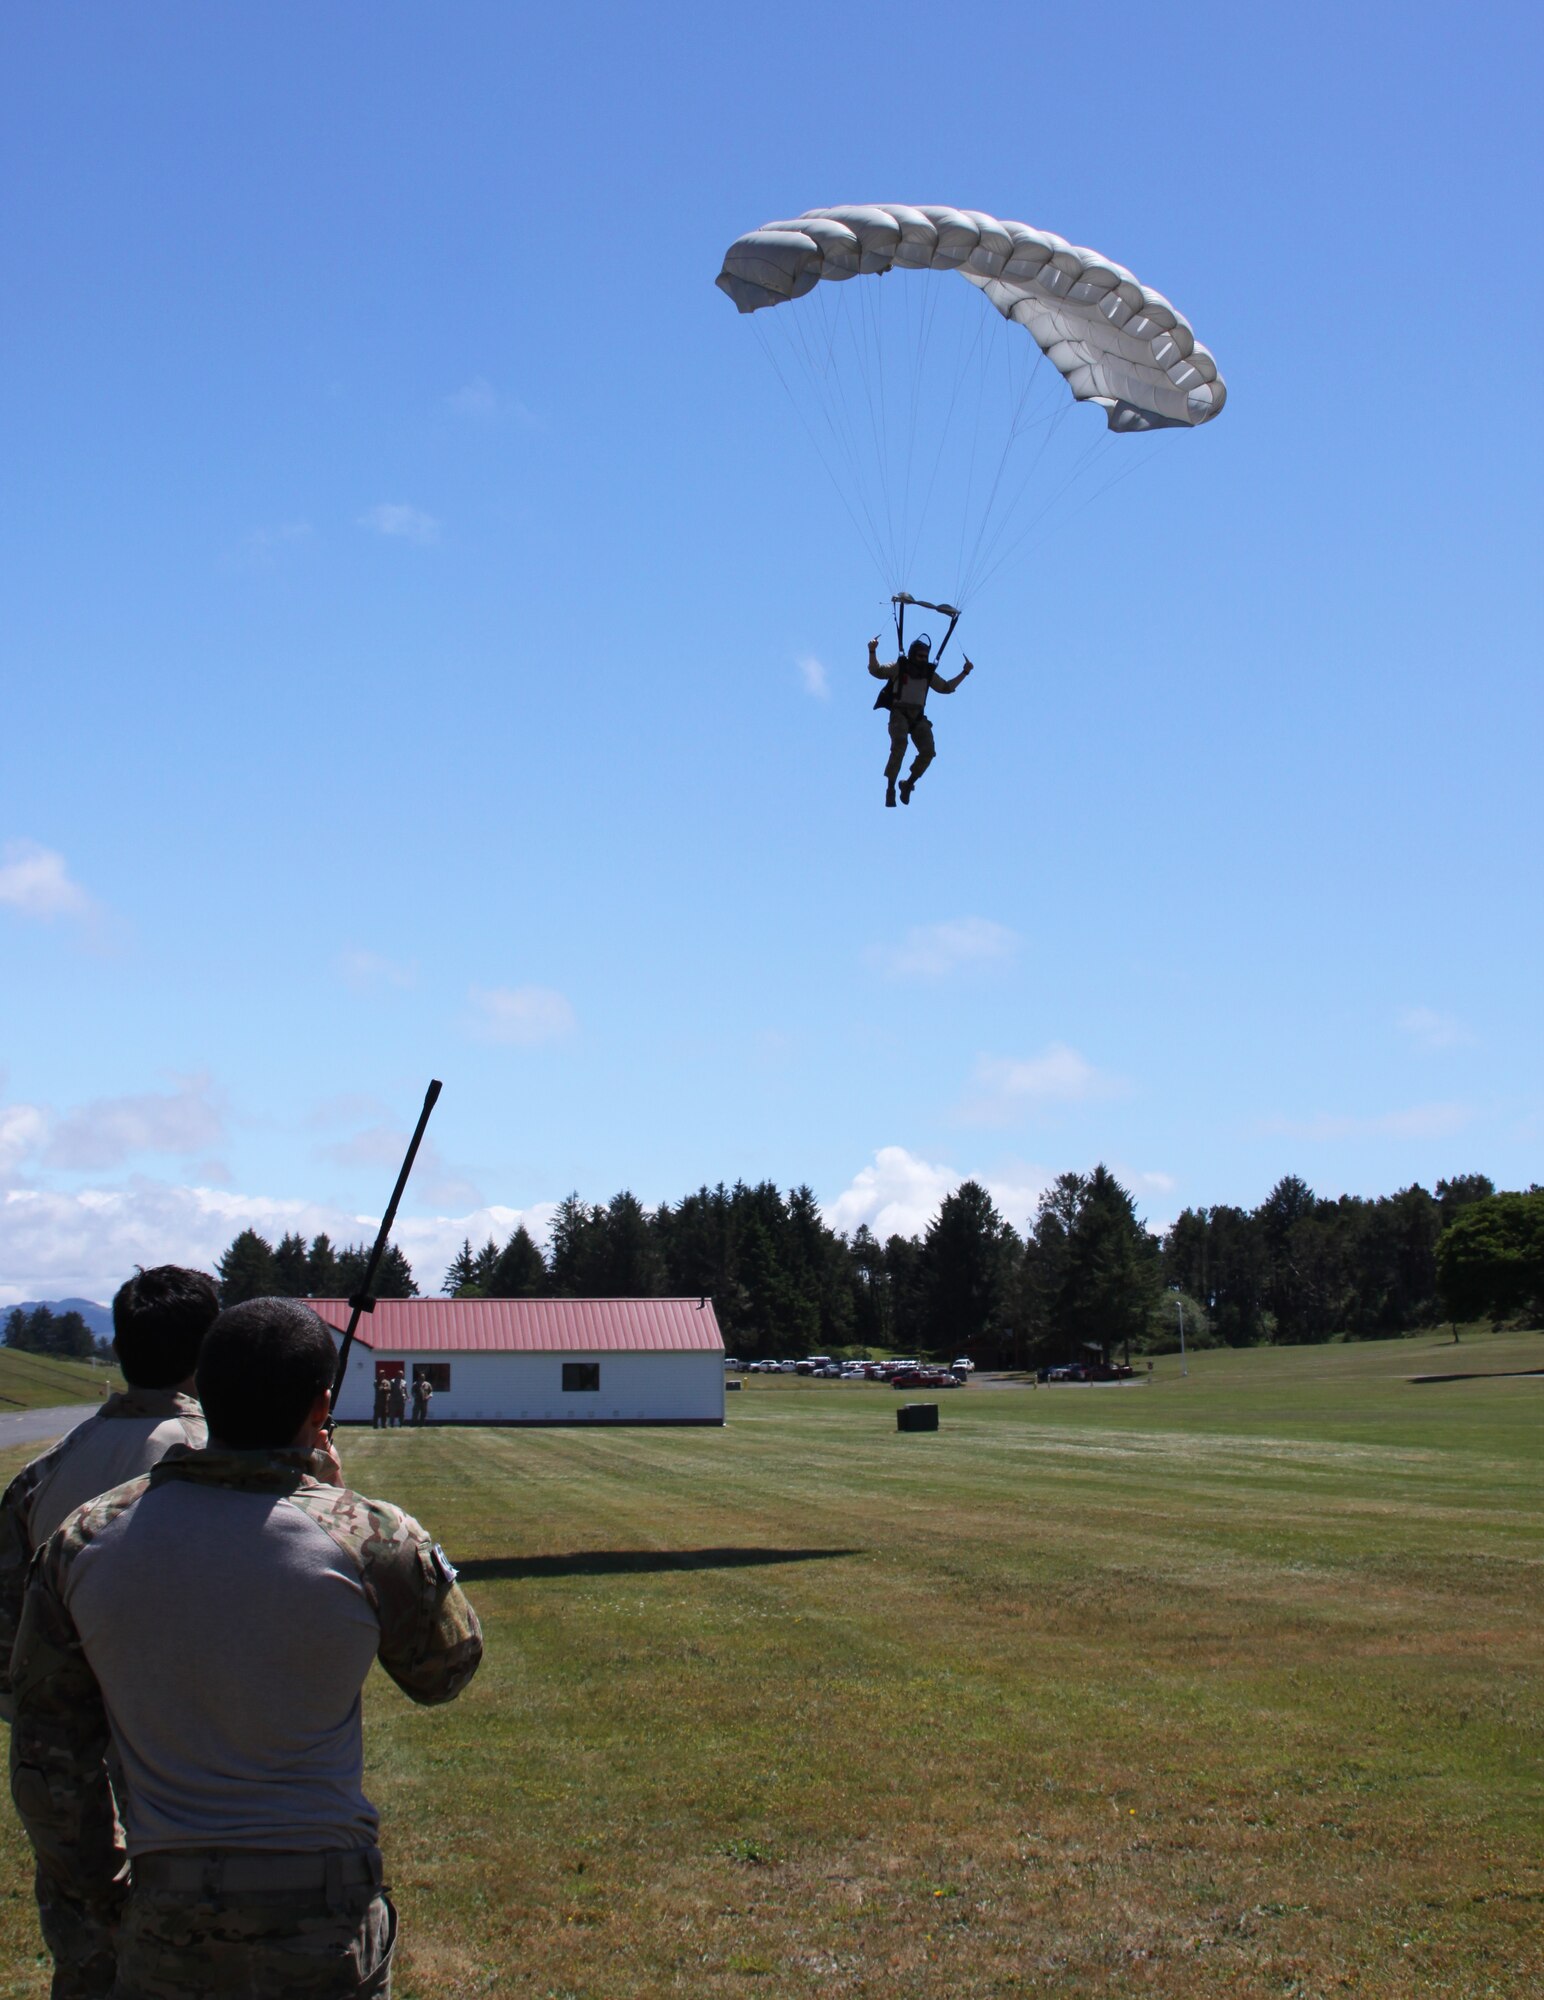 Members of the 125th Special Tactics Squadron, Portland Air National Guard Base, Portland, Ore., parachute into a parade field during a joint training operation at Camp Rilea Ore., June 21, 2013. The exercise was held over a three day period in which the Combat Operations Group (COG) made up of four individual Oregon Air Guard units; 125th STS, 116th Air Control Squadron, 270th Air Traffic Control Squadron, and the 123rd Weather Flight. The focus of the exercise was build unit morale, establish new professional networks and enhance military development. (Air National Guard Photo by Master Sgt. Shelly Davison, 142nd Fighter Wing Public Affairs).